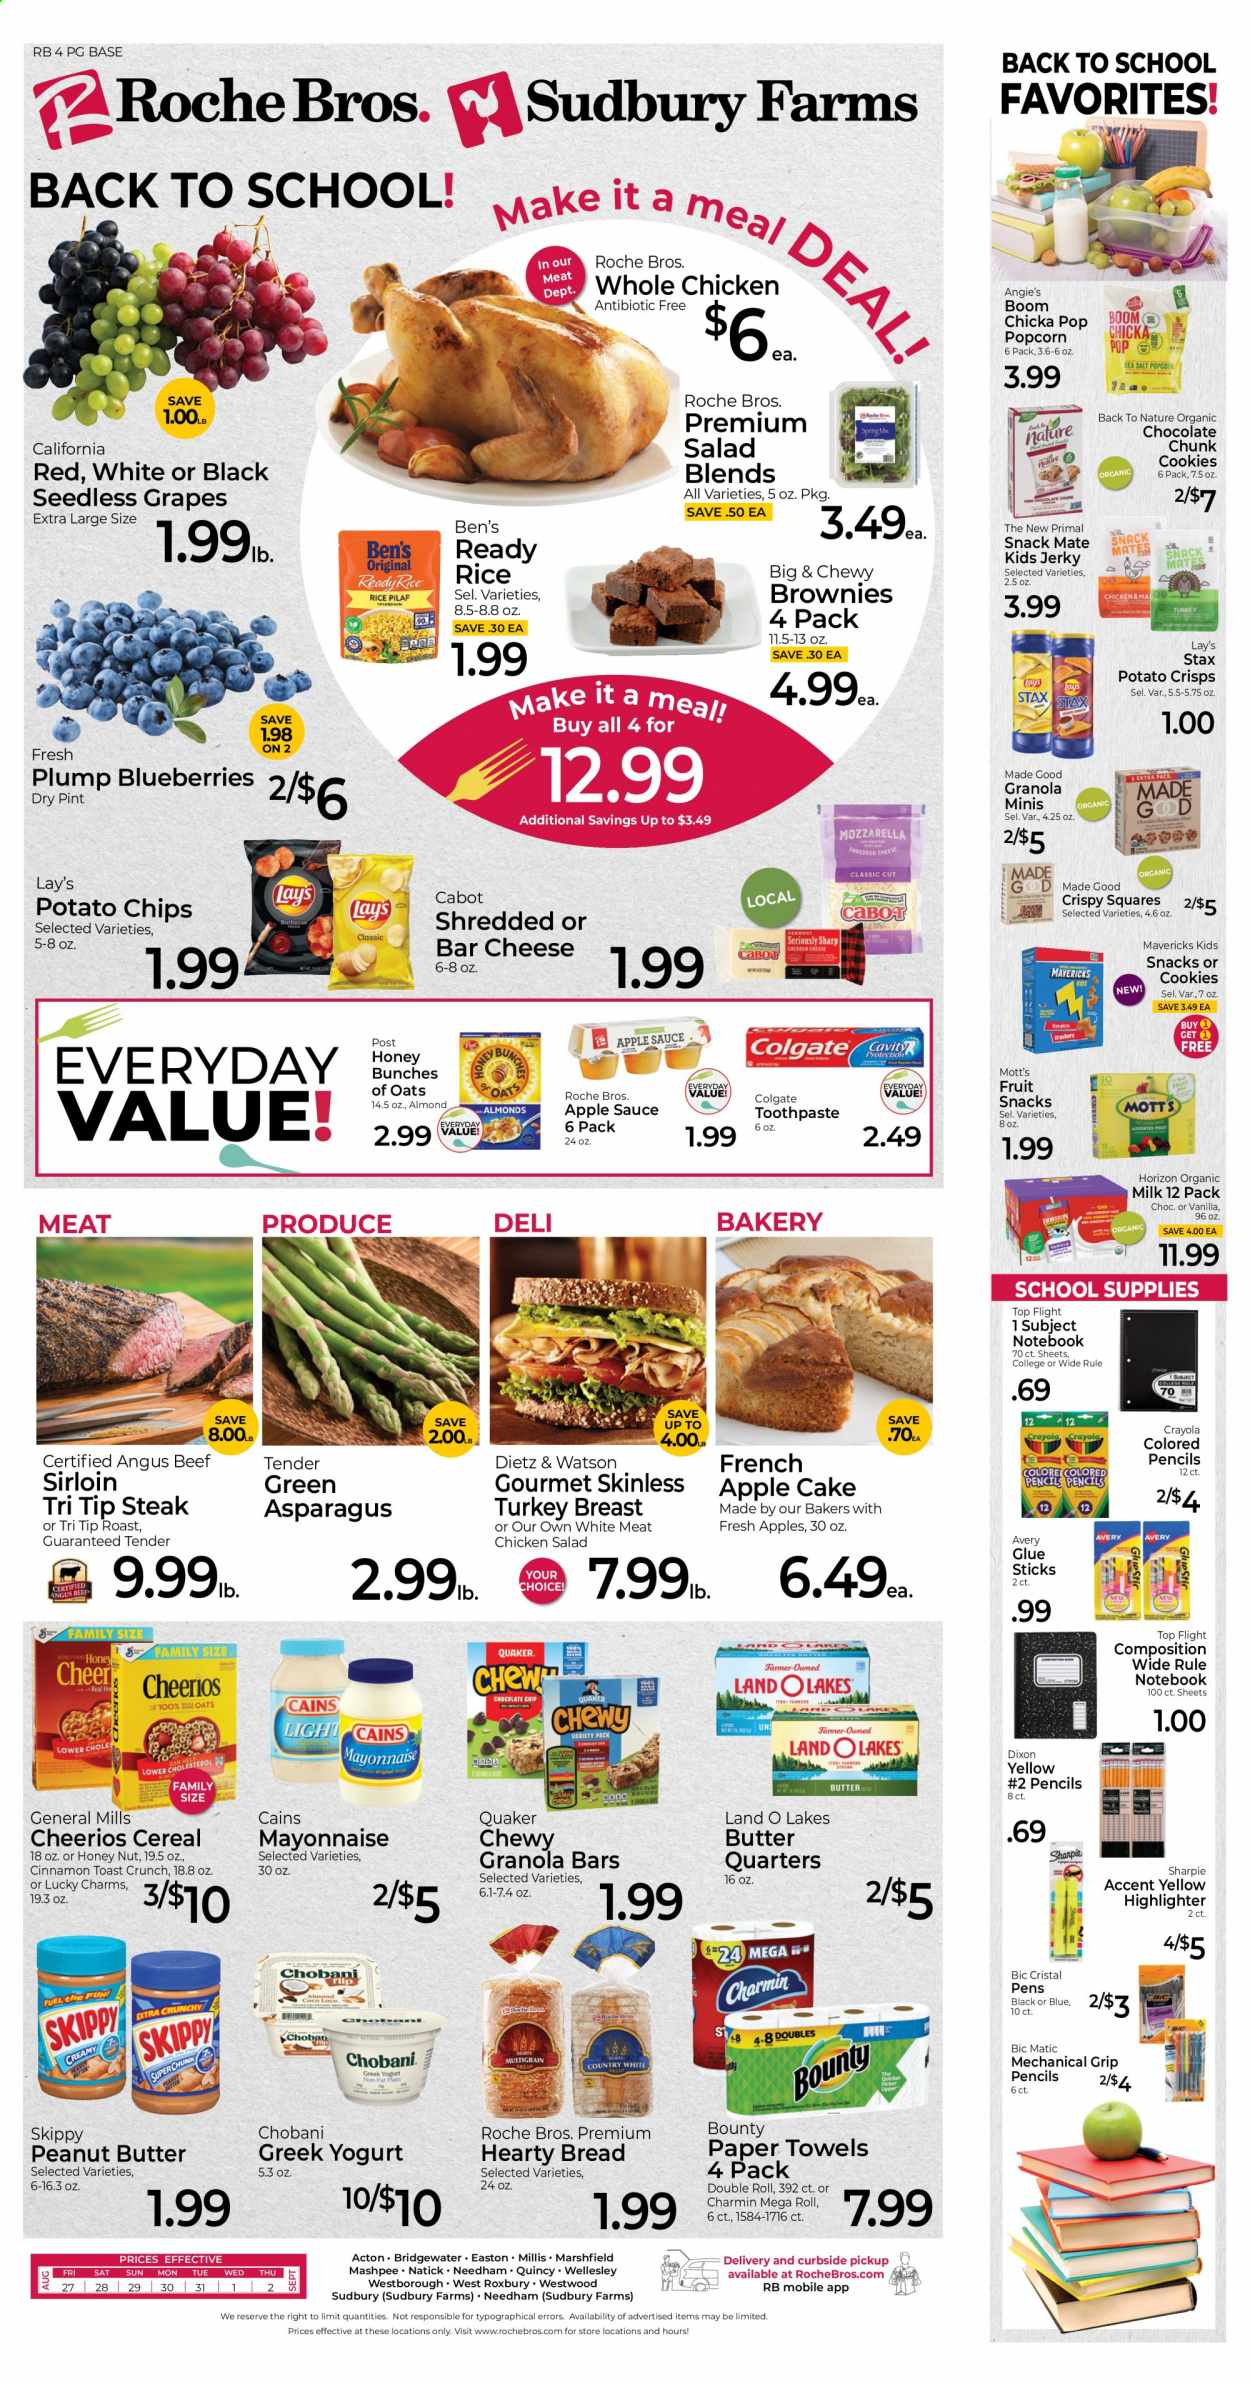 thumbnail - Roche Bros. Flyer - 08/27/2021 - 09/02/2021 - Sales products - seedless grapes, bread, cake, brownies, asparagus, salad, blueberries, grapes, Mott's, sauce, Quaker, jerky, Dietz & Watson, chicken salad, cheese, greek yoghurt, yoghurt, Chobani, organic milk, mayonnaise, cookies, chocolate, Bounty, fruit snack, potato crisps, potato chips, chips, Lay’s, popcorn, cereals, Cheerios, granola bar, cinnamon, apple sauce, peanut butter, turkey breast, whole chicken, beef meat, steak, kitchen towels, paper towels, Charmin, Colgate, toothpaste, BIC, Bakers, Primal. Page 1.